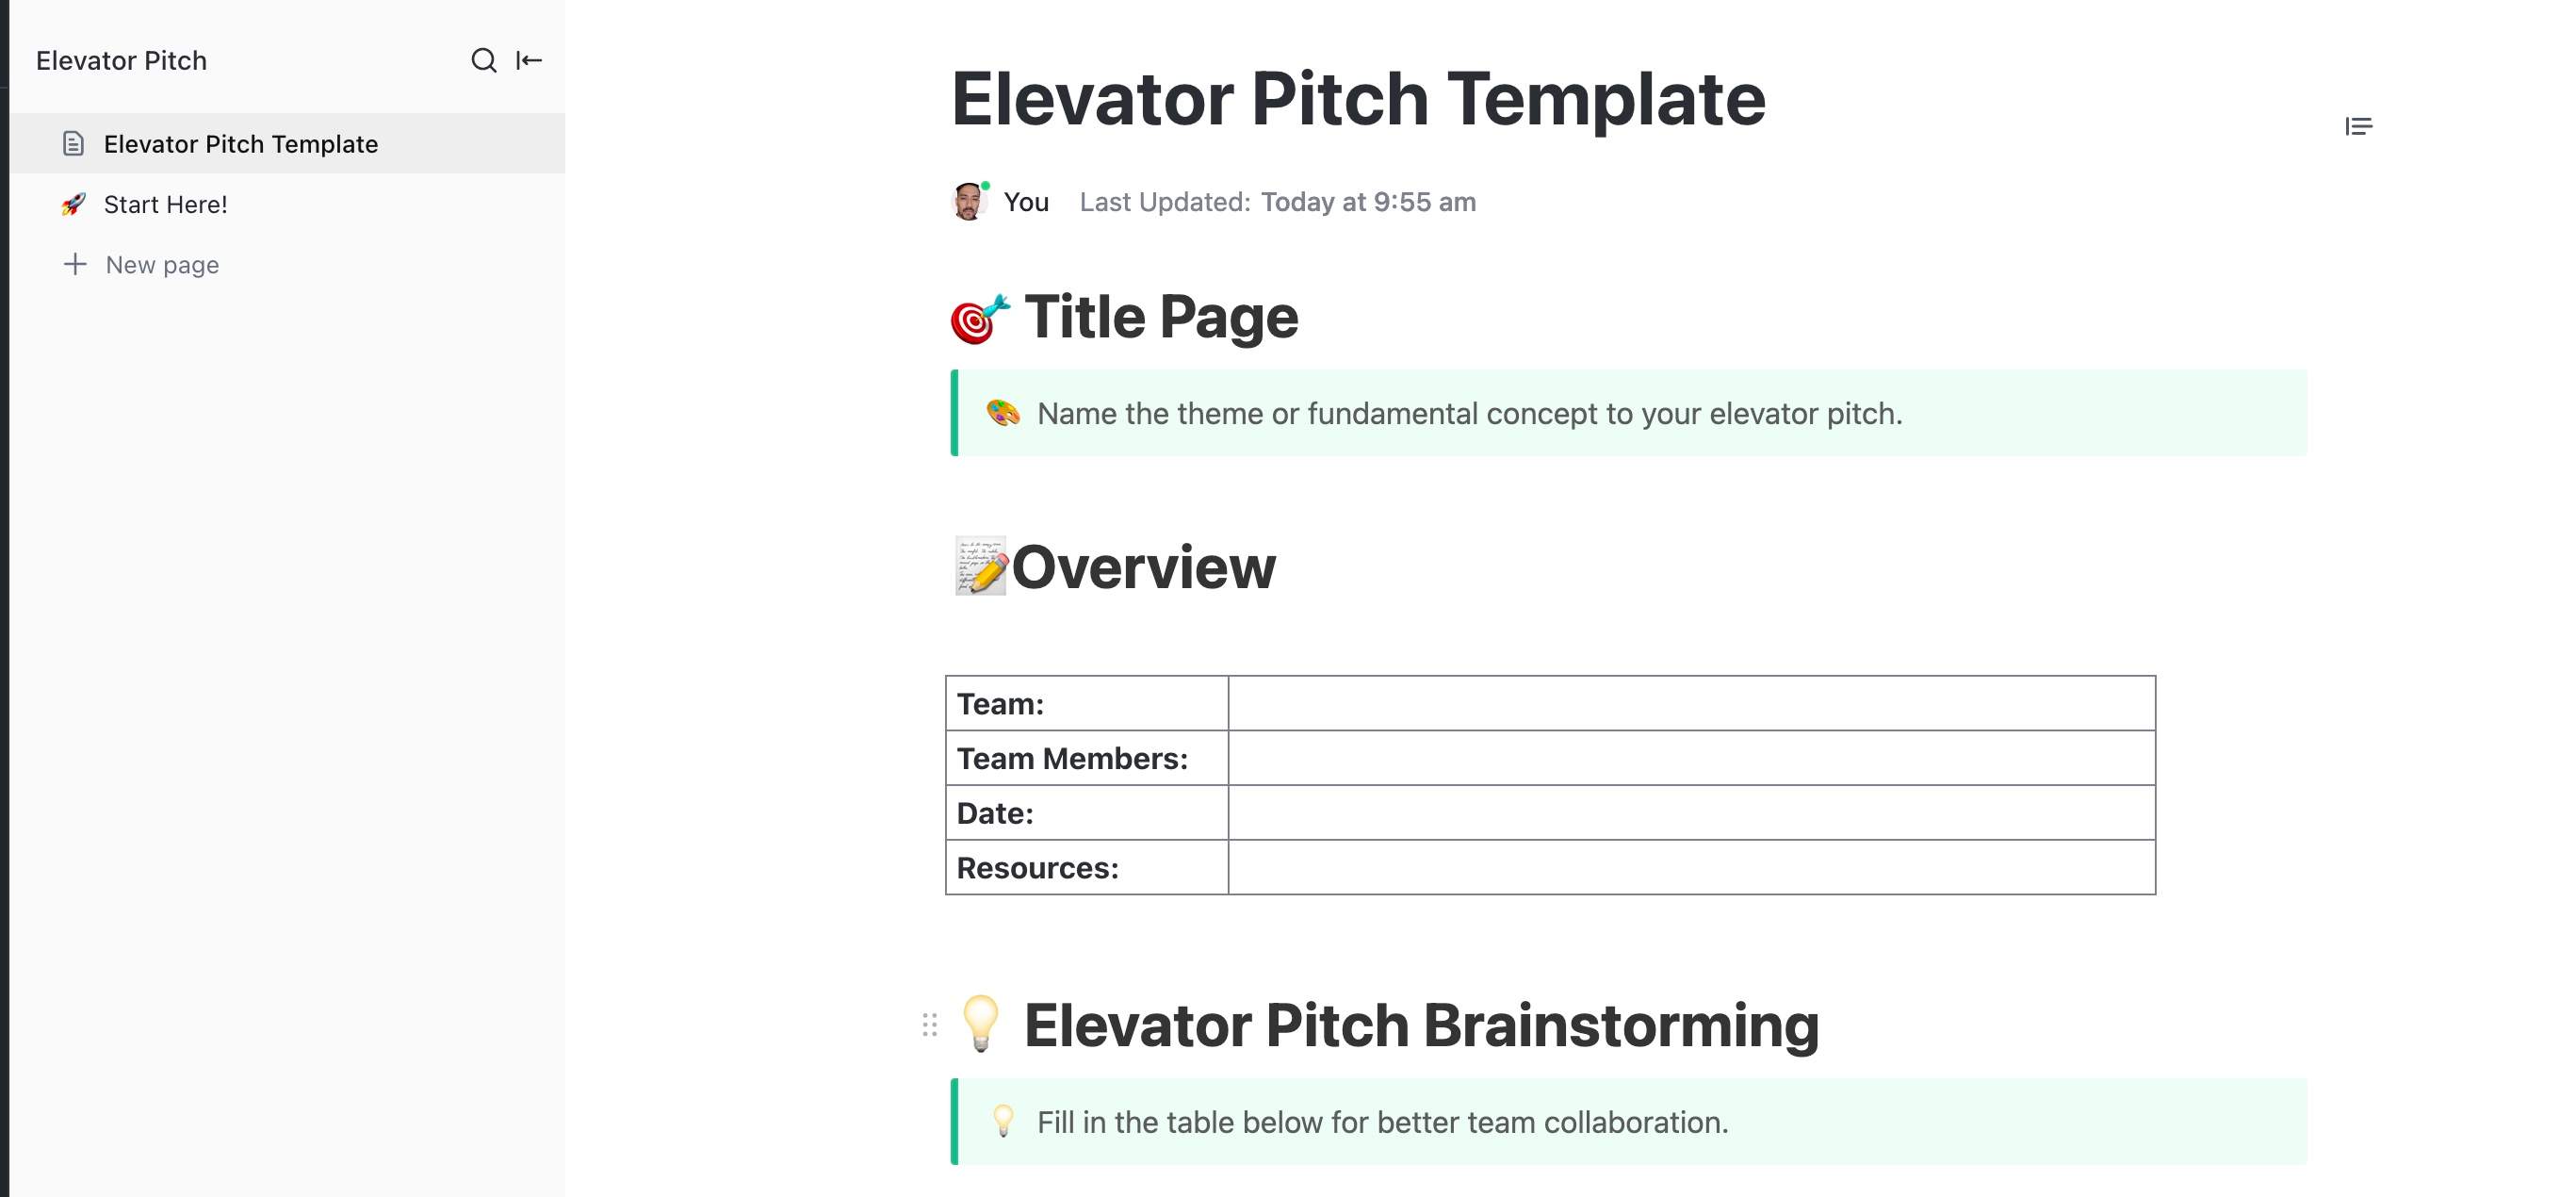 Easily create an elevator pitch with this template as an outline to create a compelling speech. Now you can brainstorm with your team and get things done efficiently and on time!